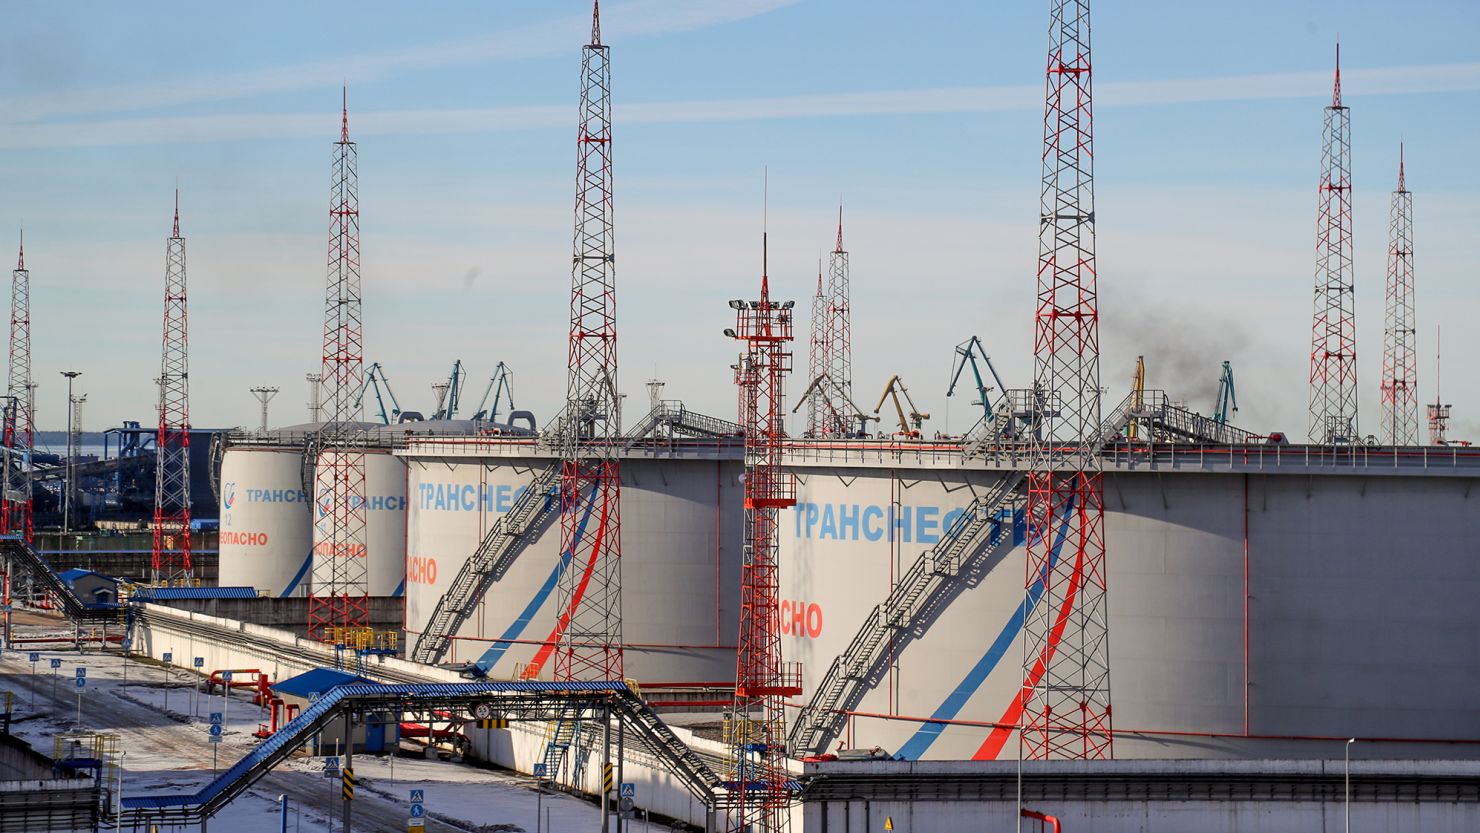 05 March 2022, Russia, Ust-Luga: Tanks belonging to Transneft, a Russian state-owned company that operates the country's oil pipelines, at the Ust-Luga oil terminal. 